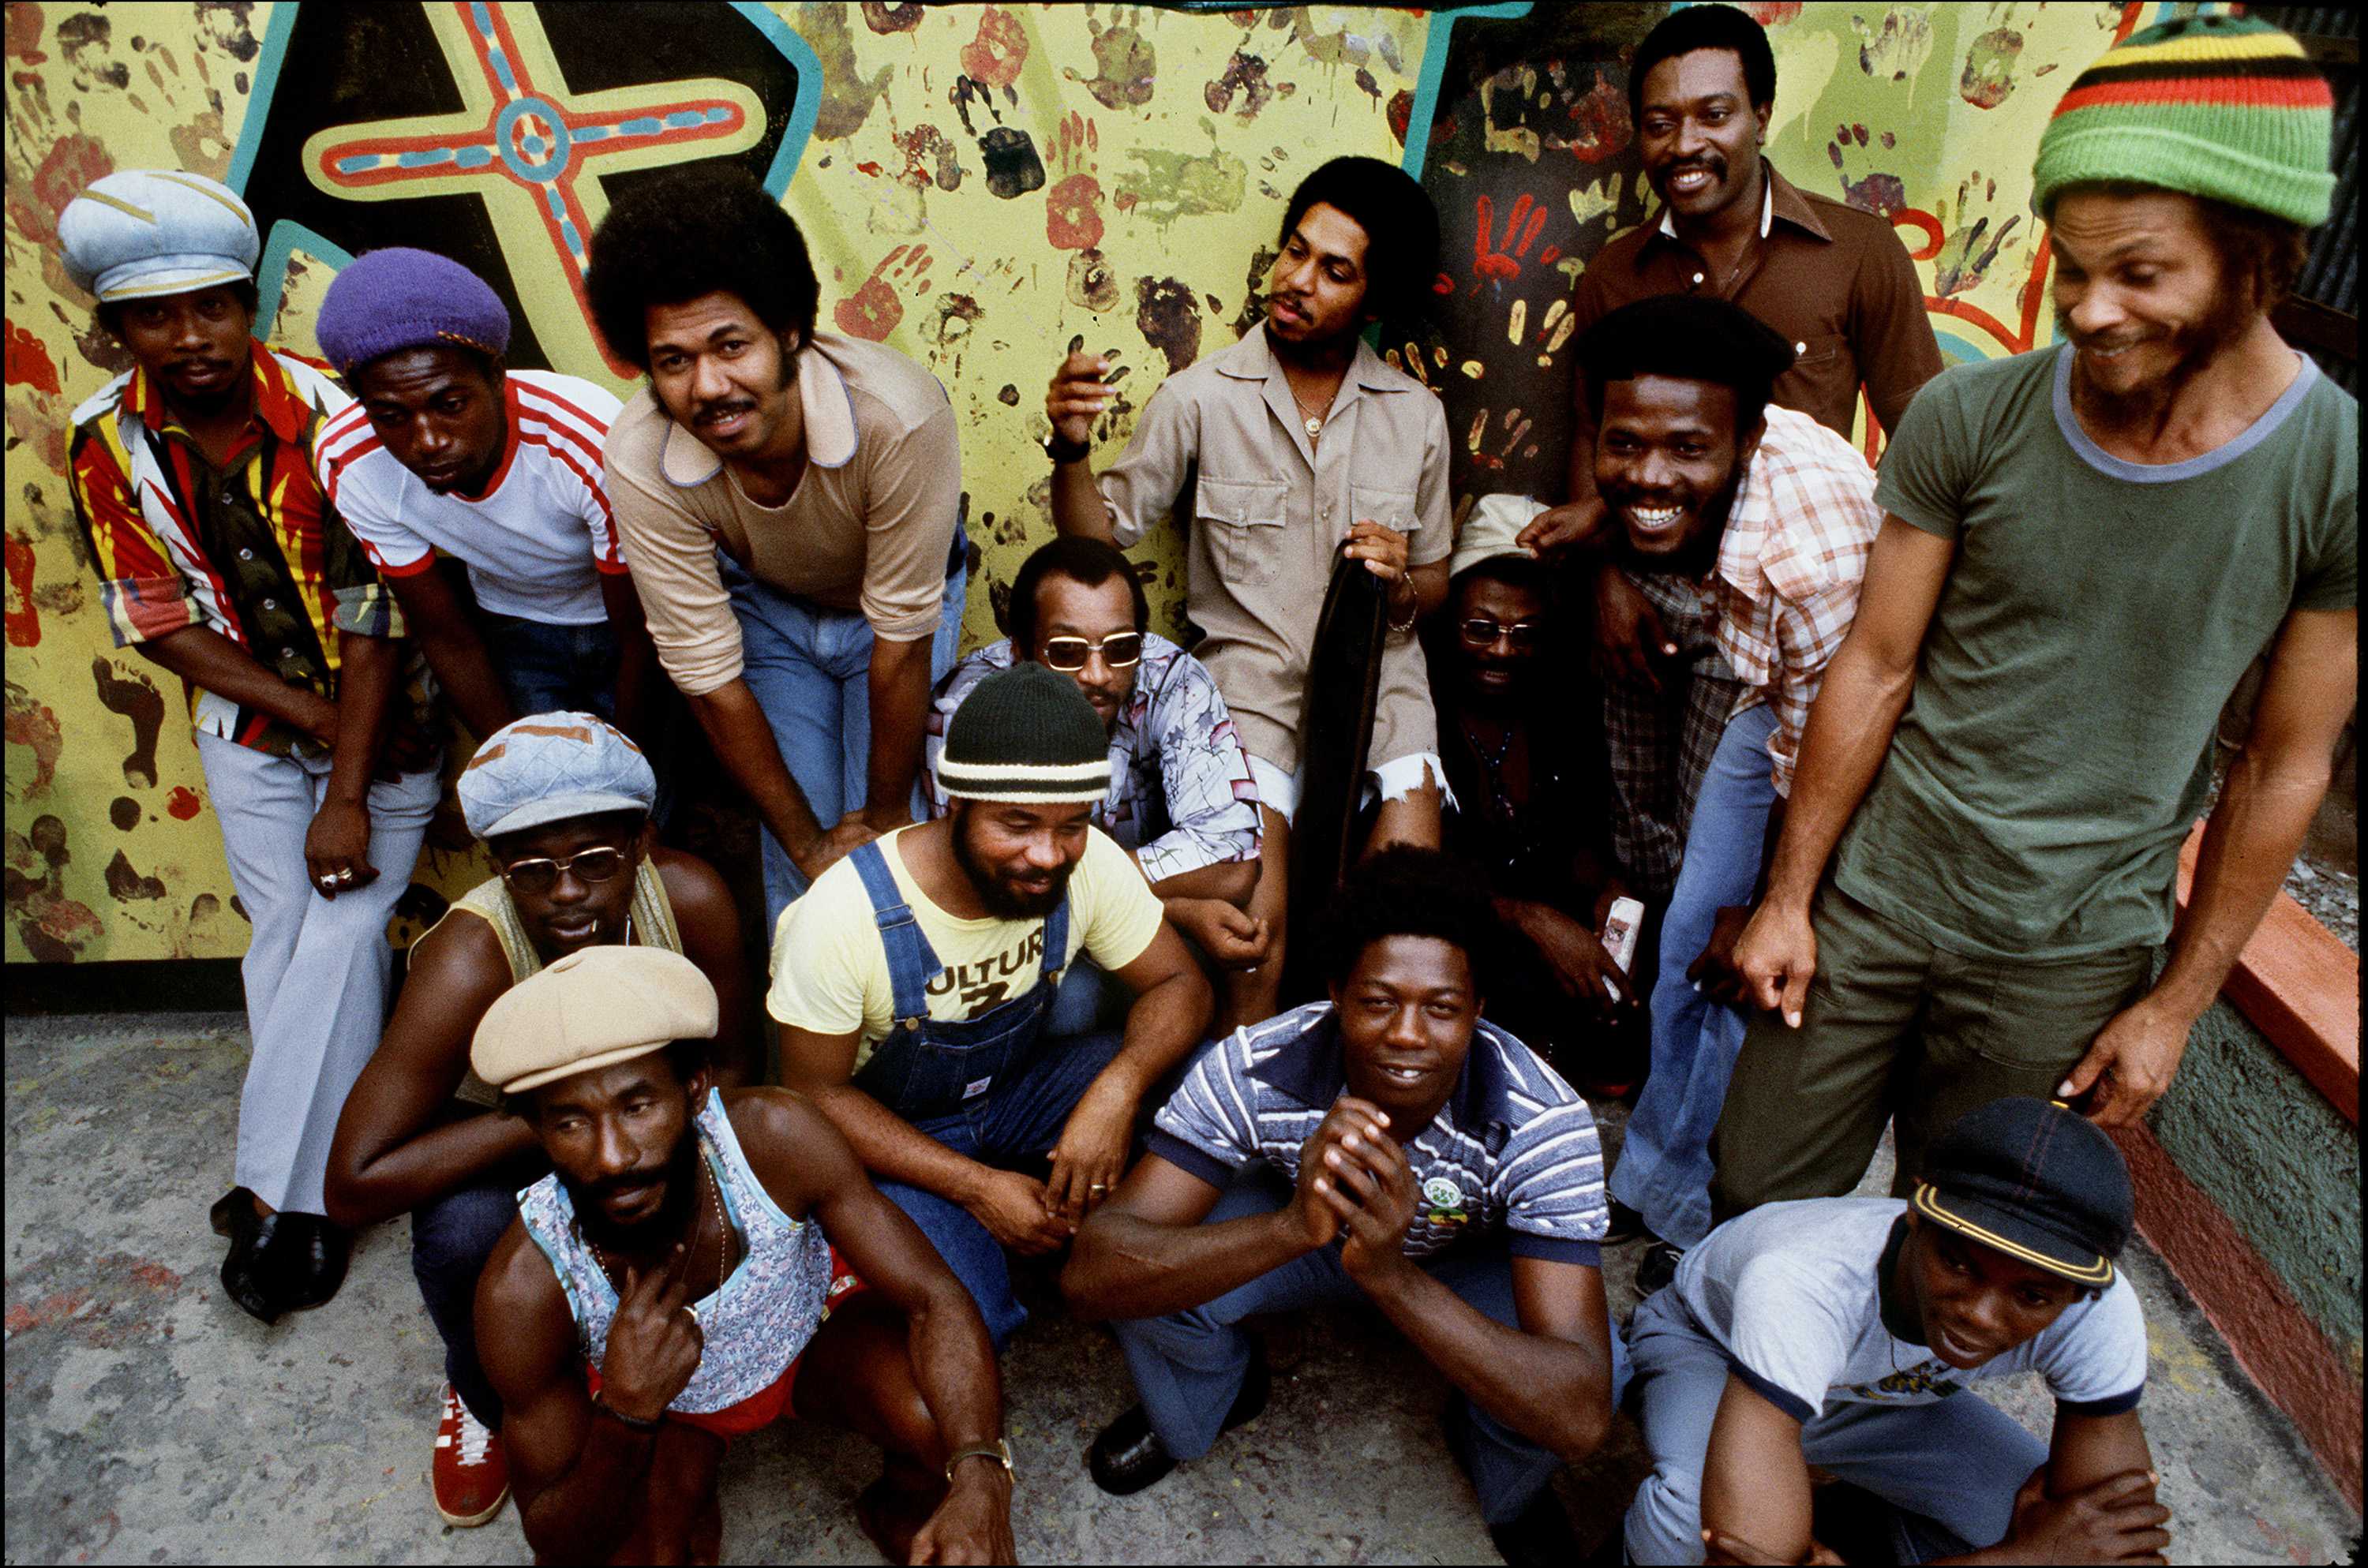 Lee “Scratch” Perry standing with members of The Upsetters outside. Some are crouching, others are standing in front of the yellow wall.